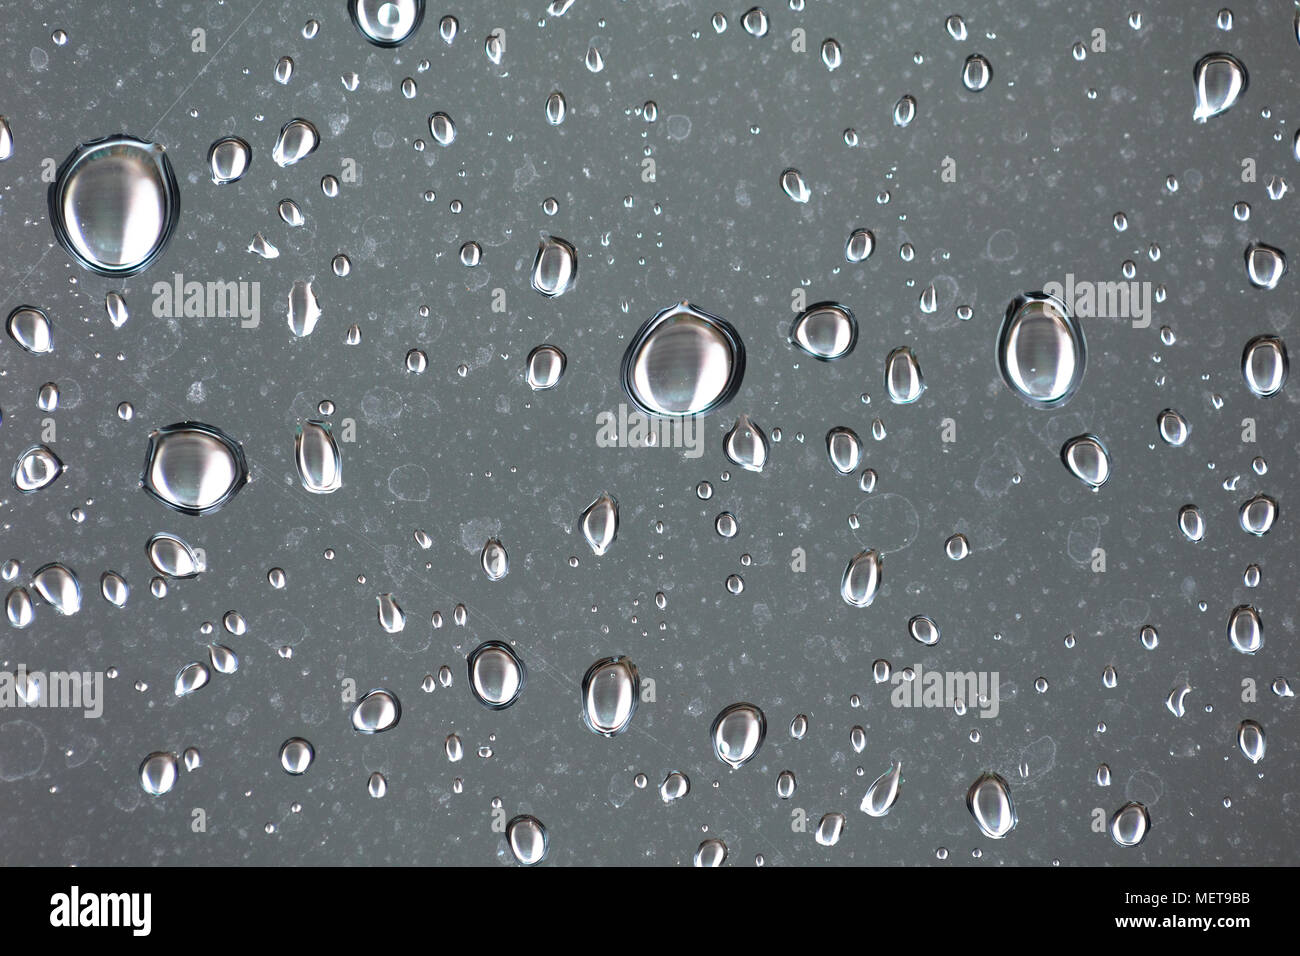 Closeup view of raindrops on a window during rain storm Stock Photo